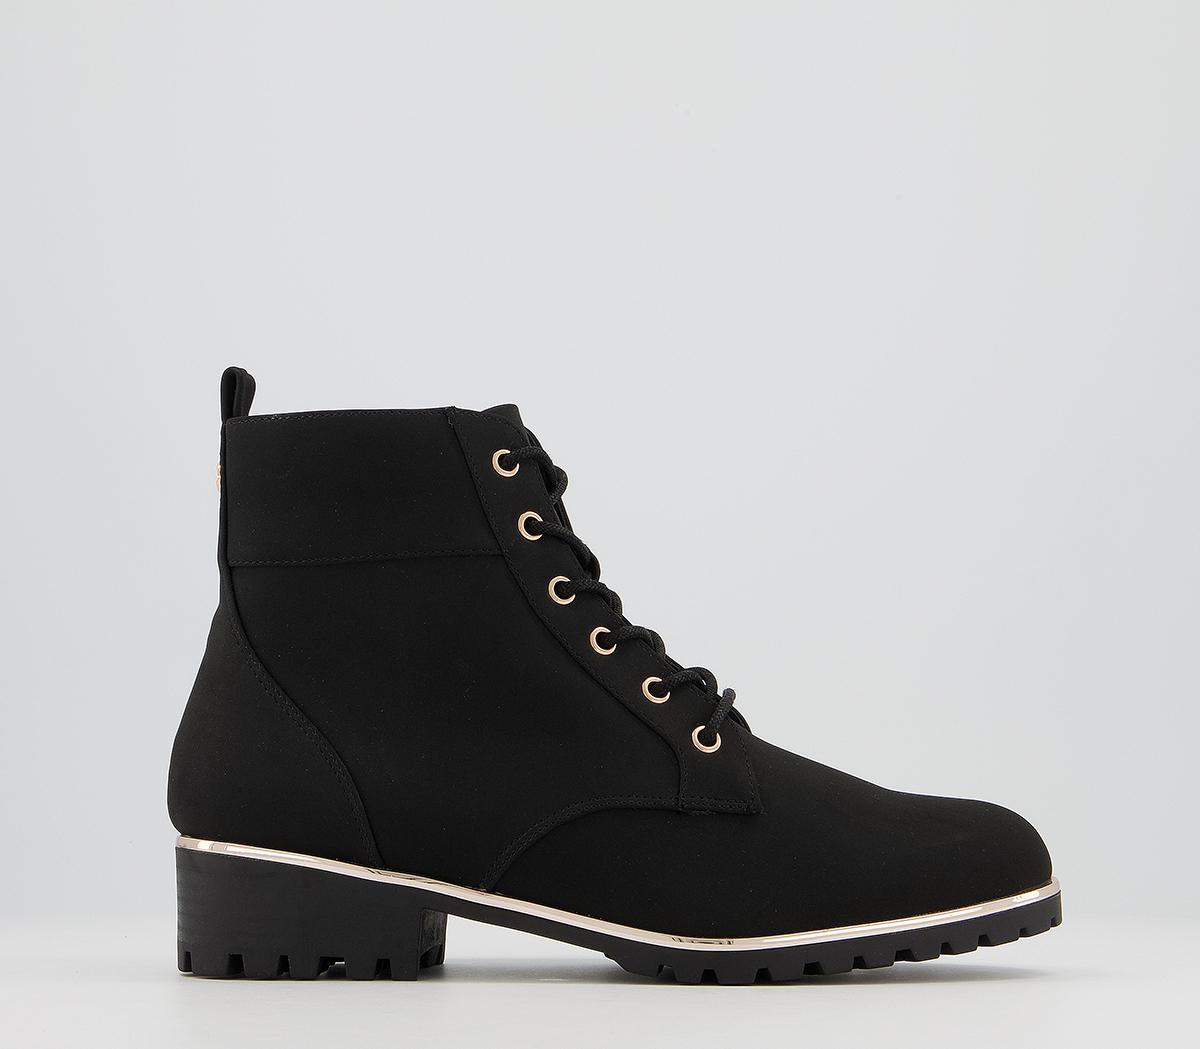 OFFICEArticle Hardware Lace Up Ankle BootsBlack